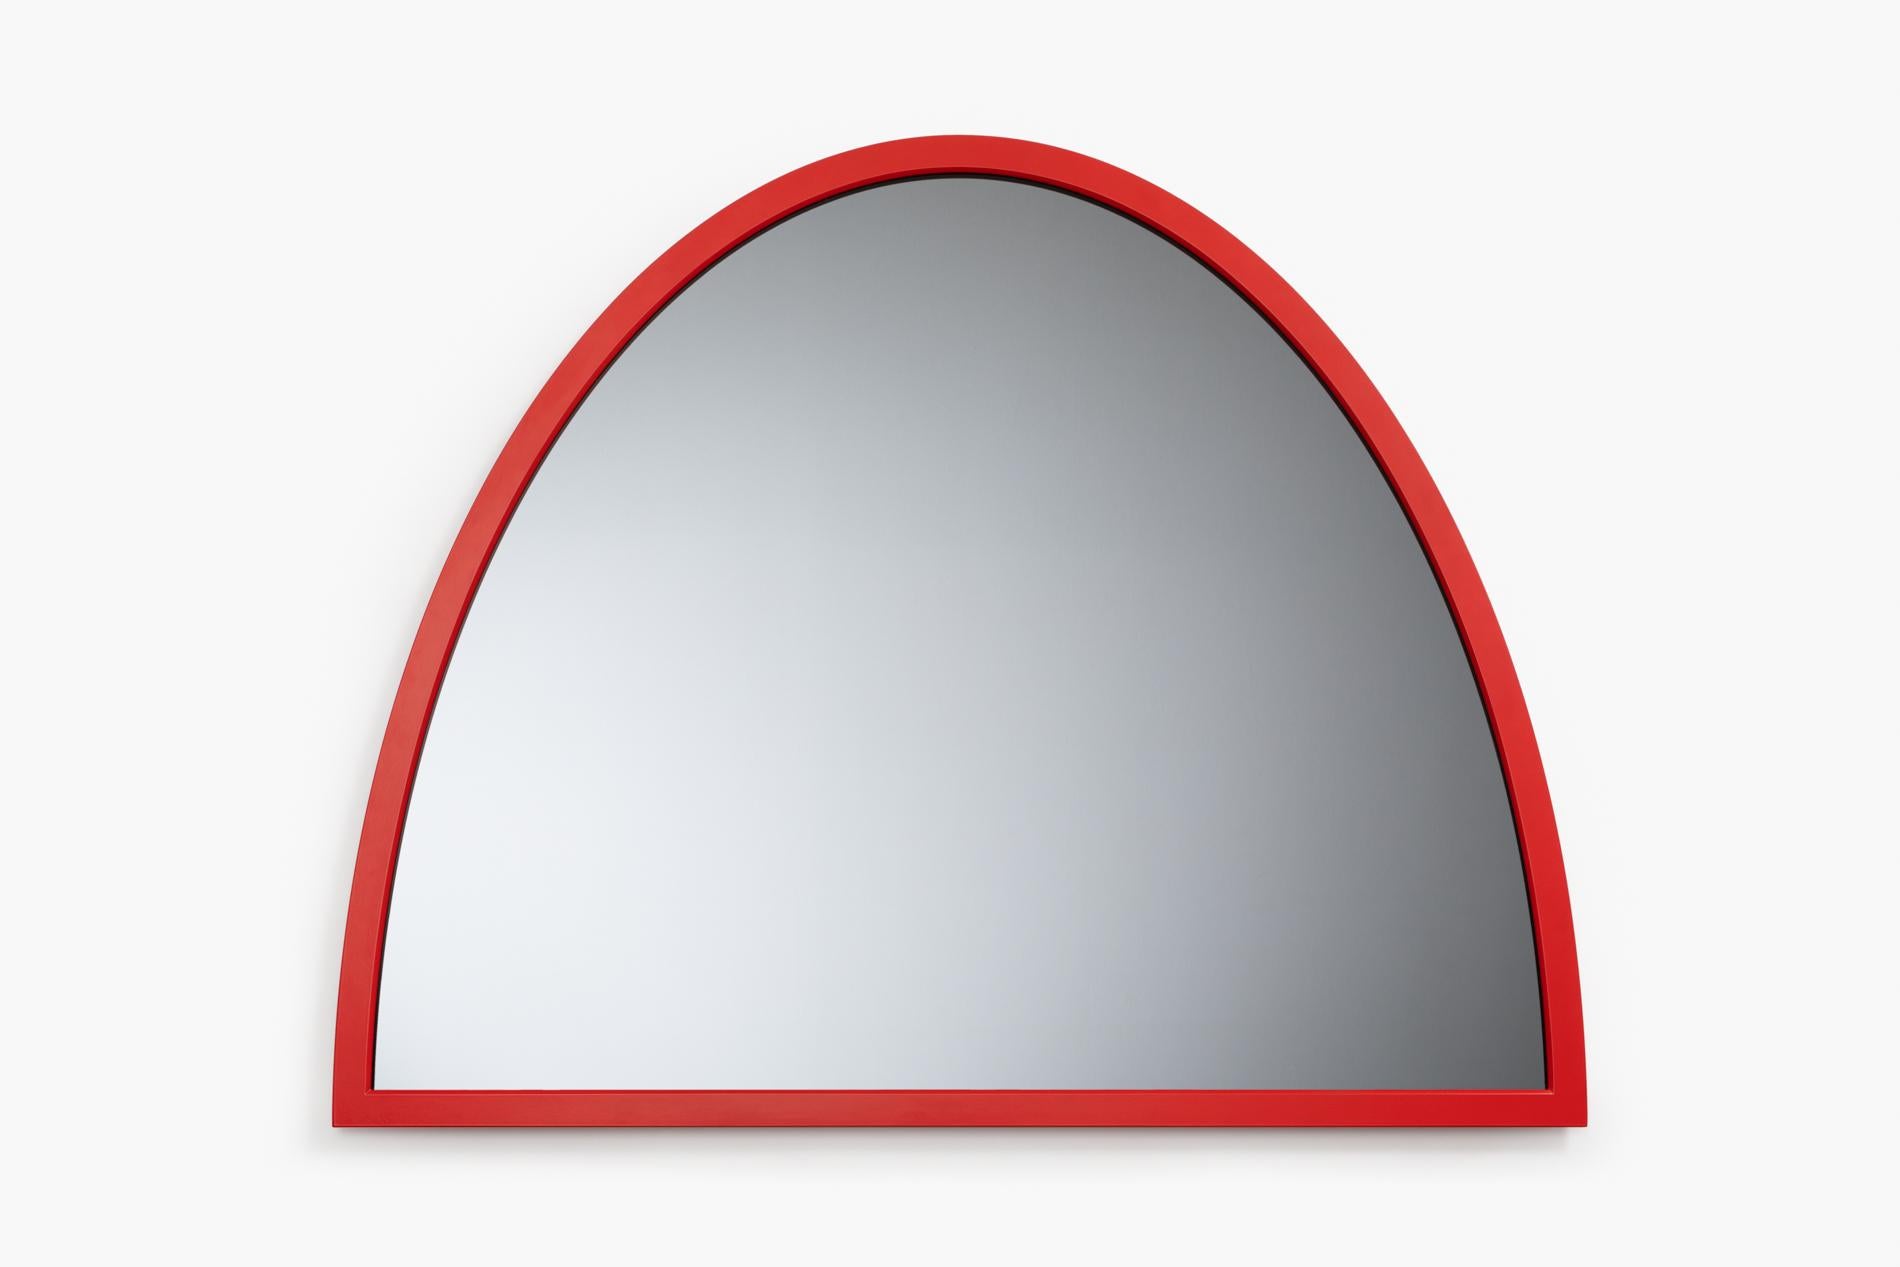 Mirooo medium mirror by Moure Studio.
Dimensions: d 100 x h 80.5 cm.
Materials: smoked glass and steel.

3 mirrors in grey smoked glass and coloured steel in different colours.
Together, these mirrors give a strong look to an interior.
Their